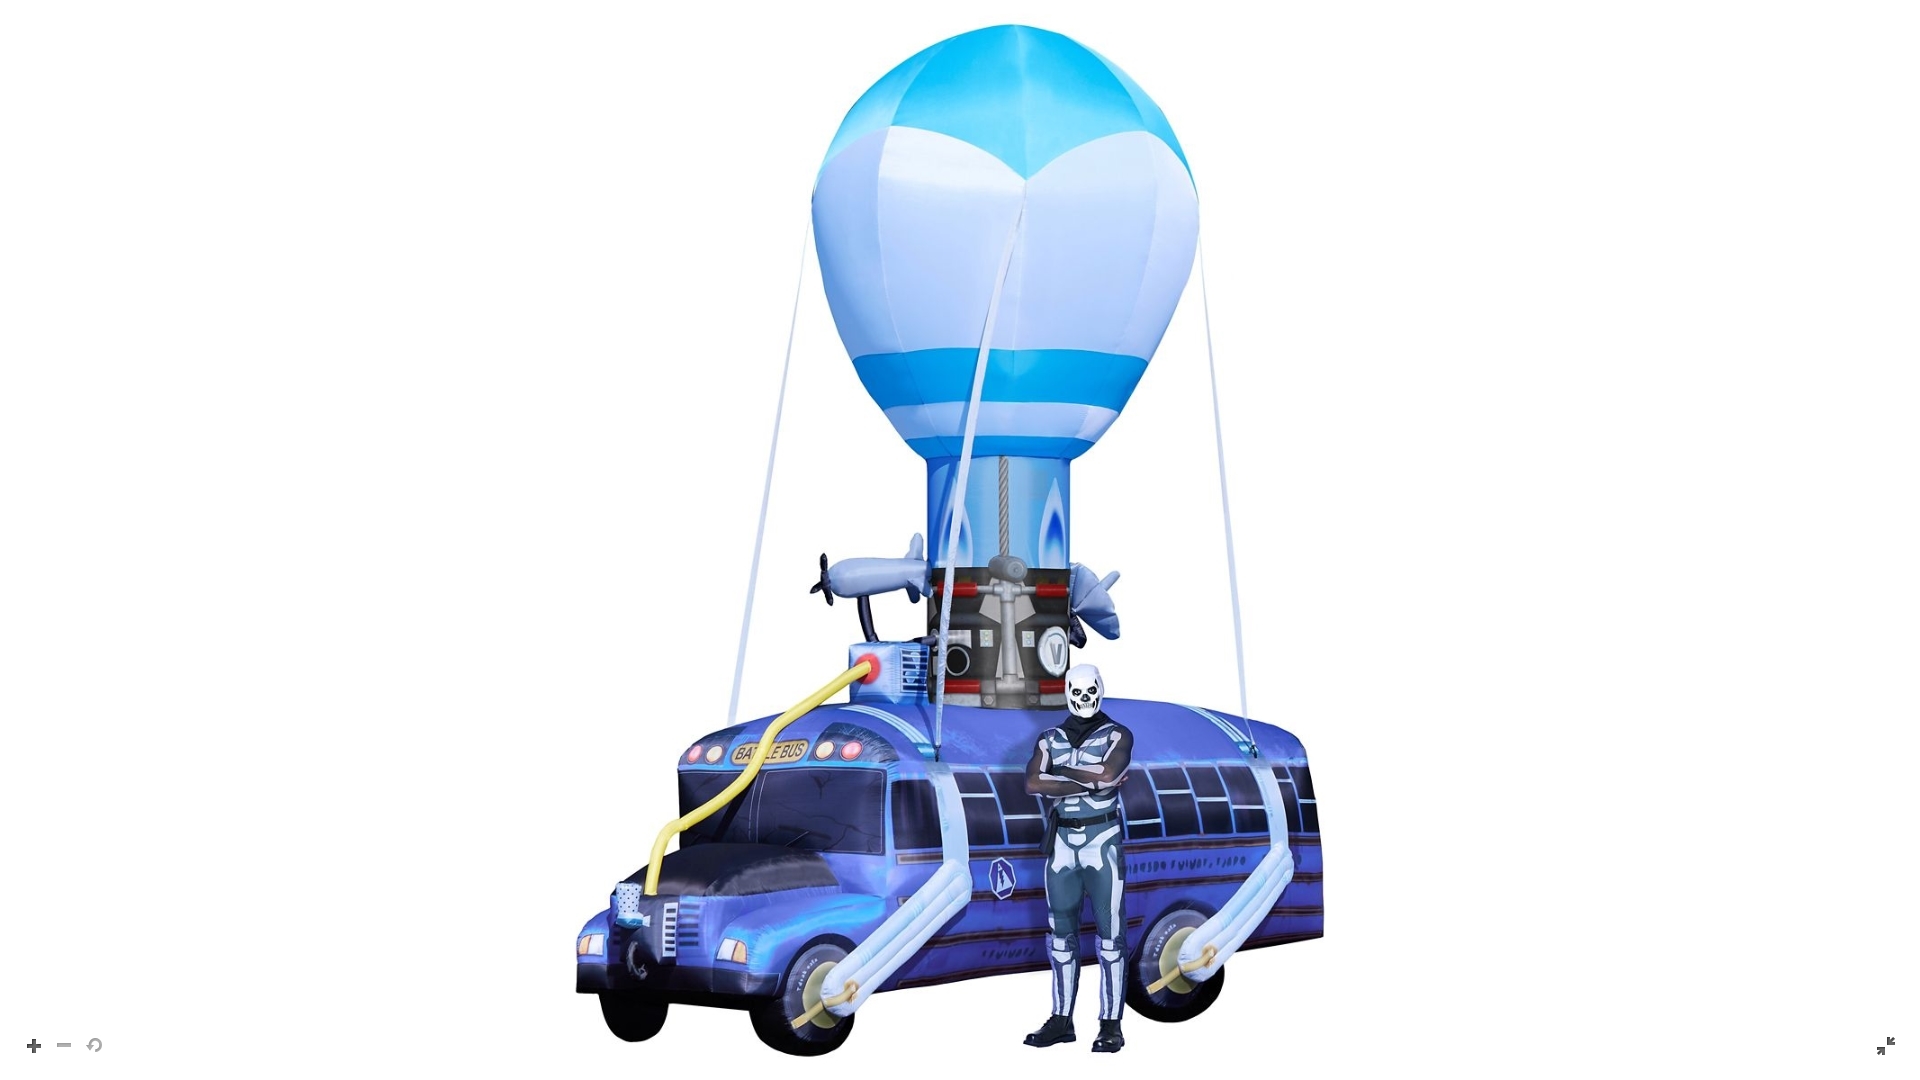 you can buy a 17 feet tall inflatable fortnite battle bus for 500 to confuse your neighbors - fortnite autobus de batalla